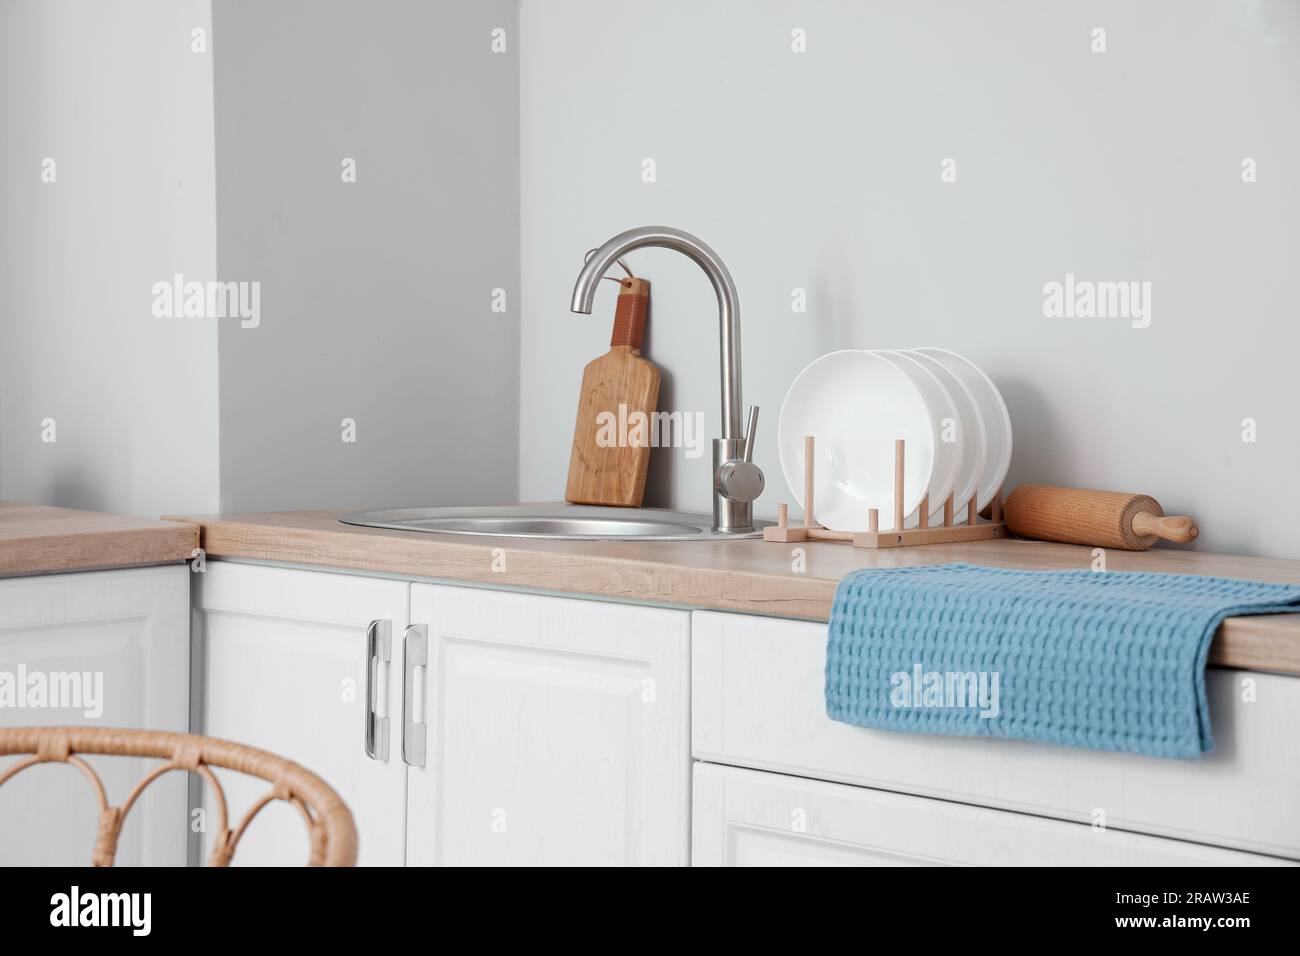 Sink and plate rack on wooden countertop in modern kitchen Stock Photo